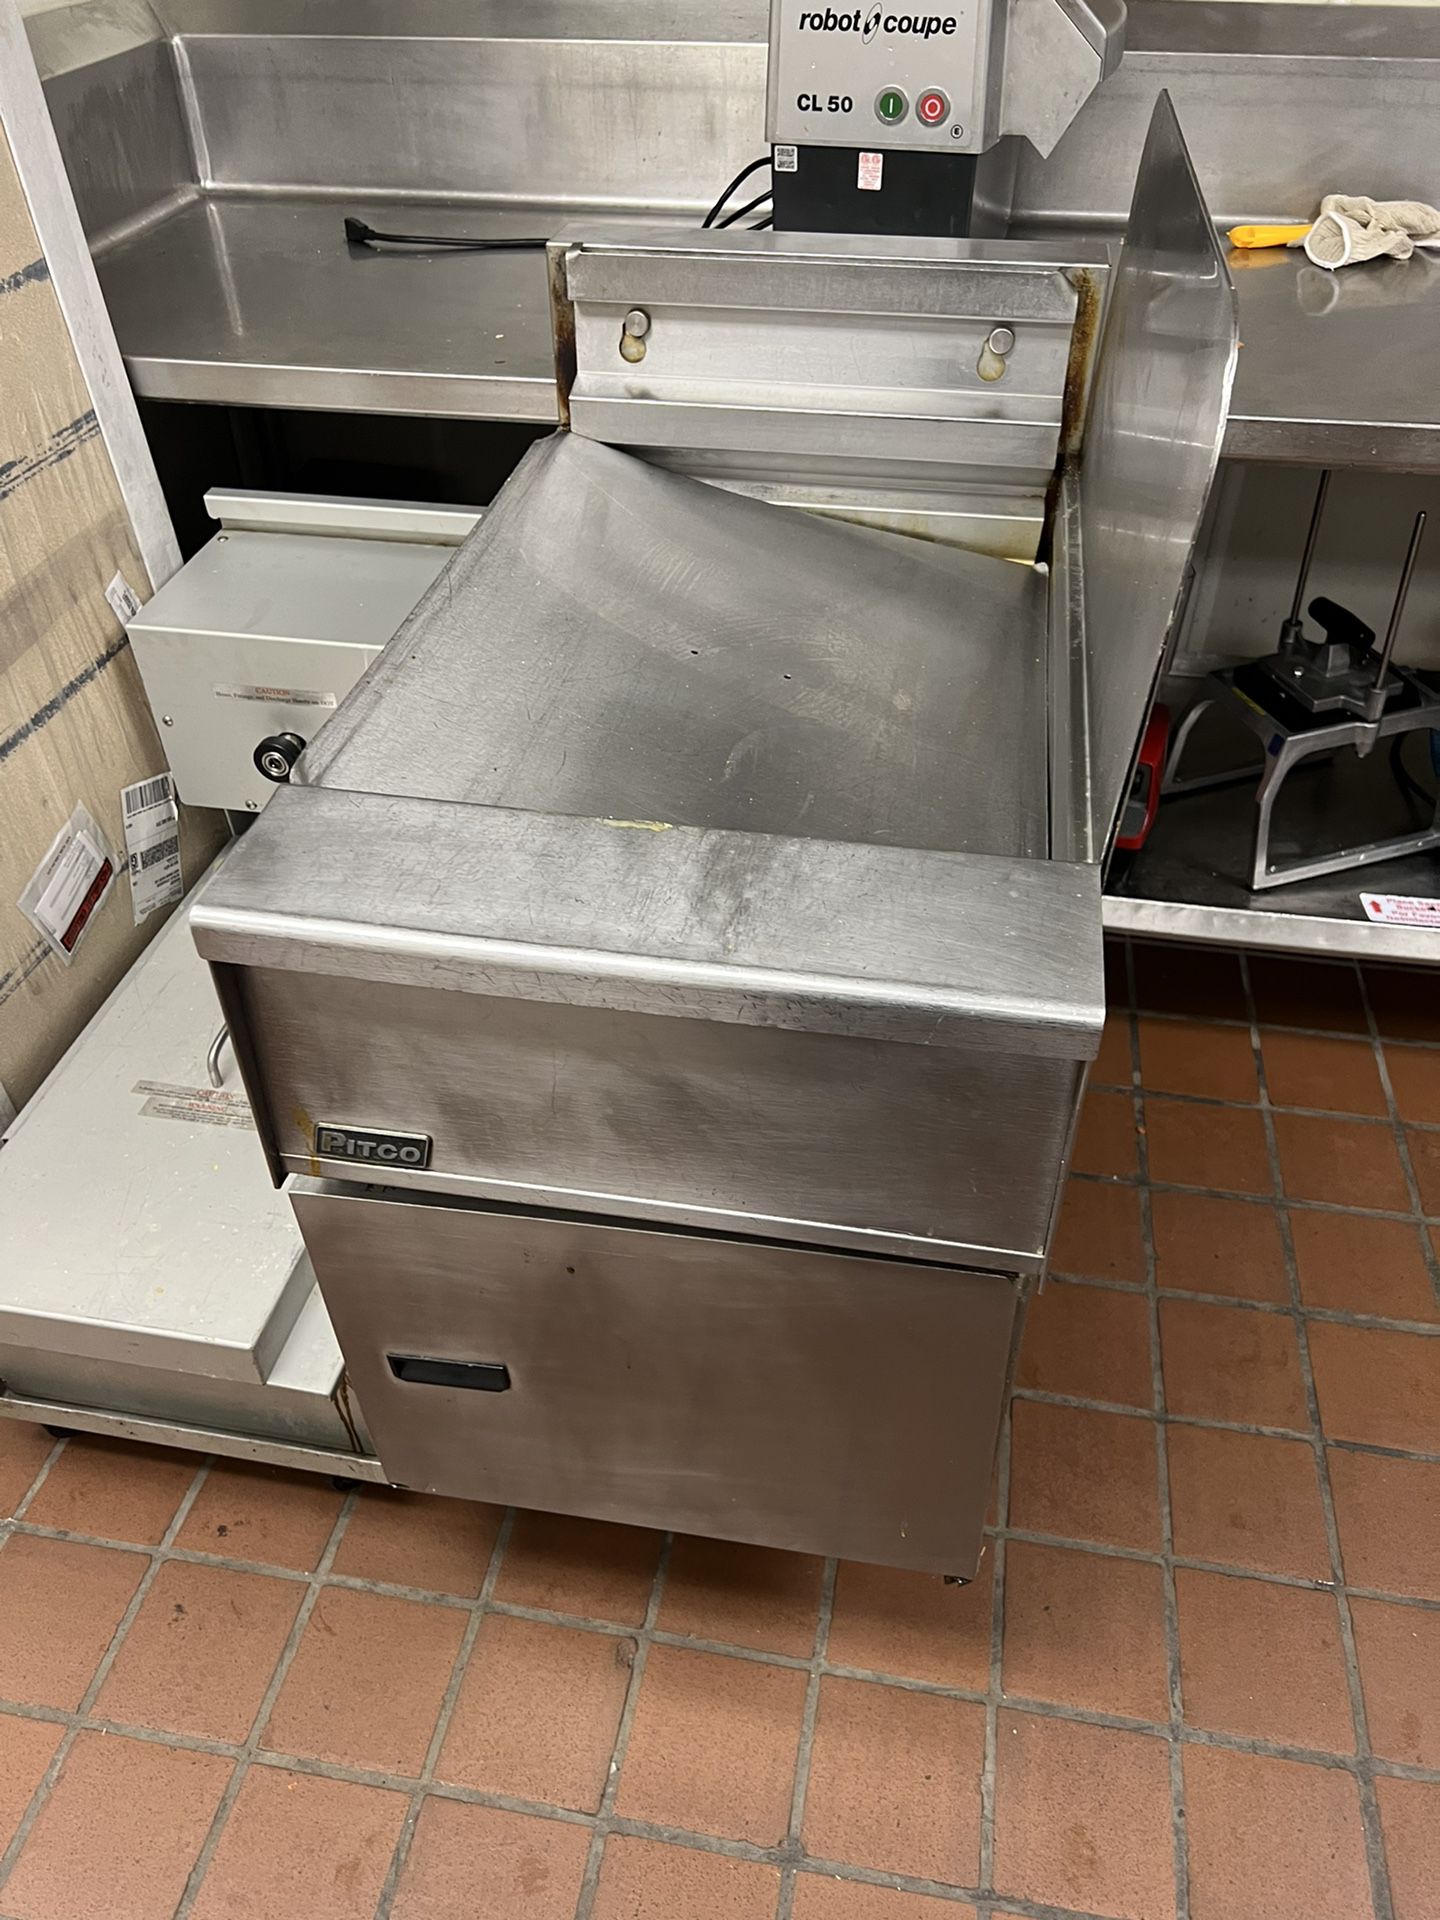 Commercial Fryer And Filter 